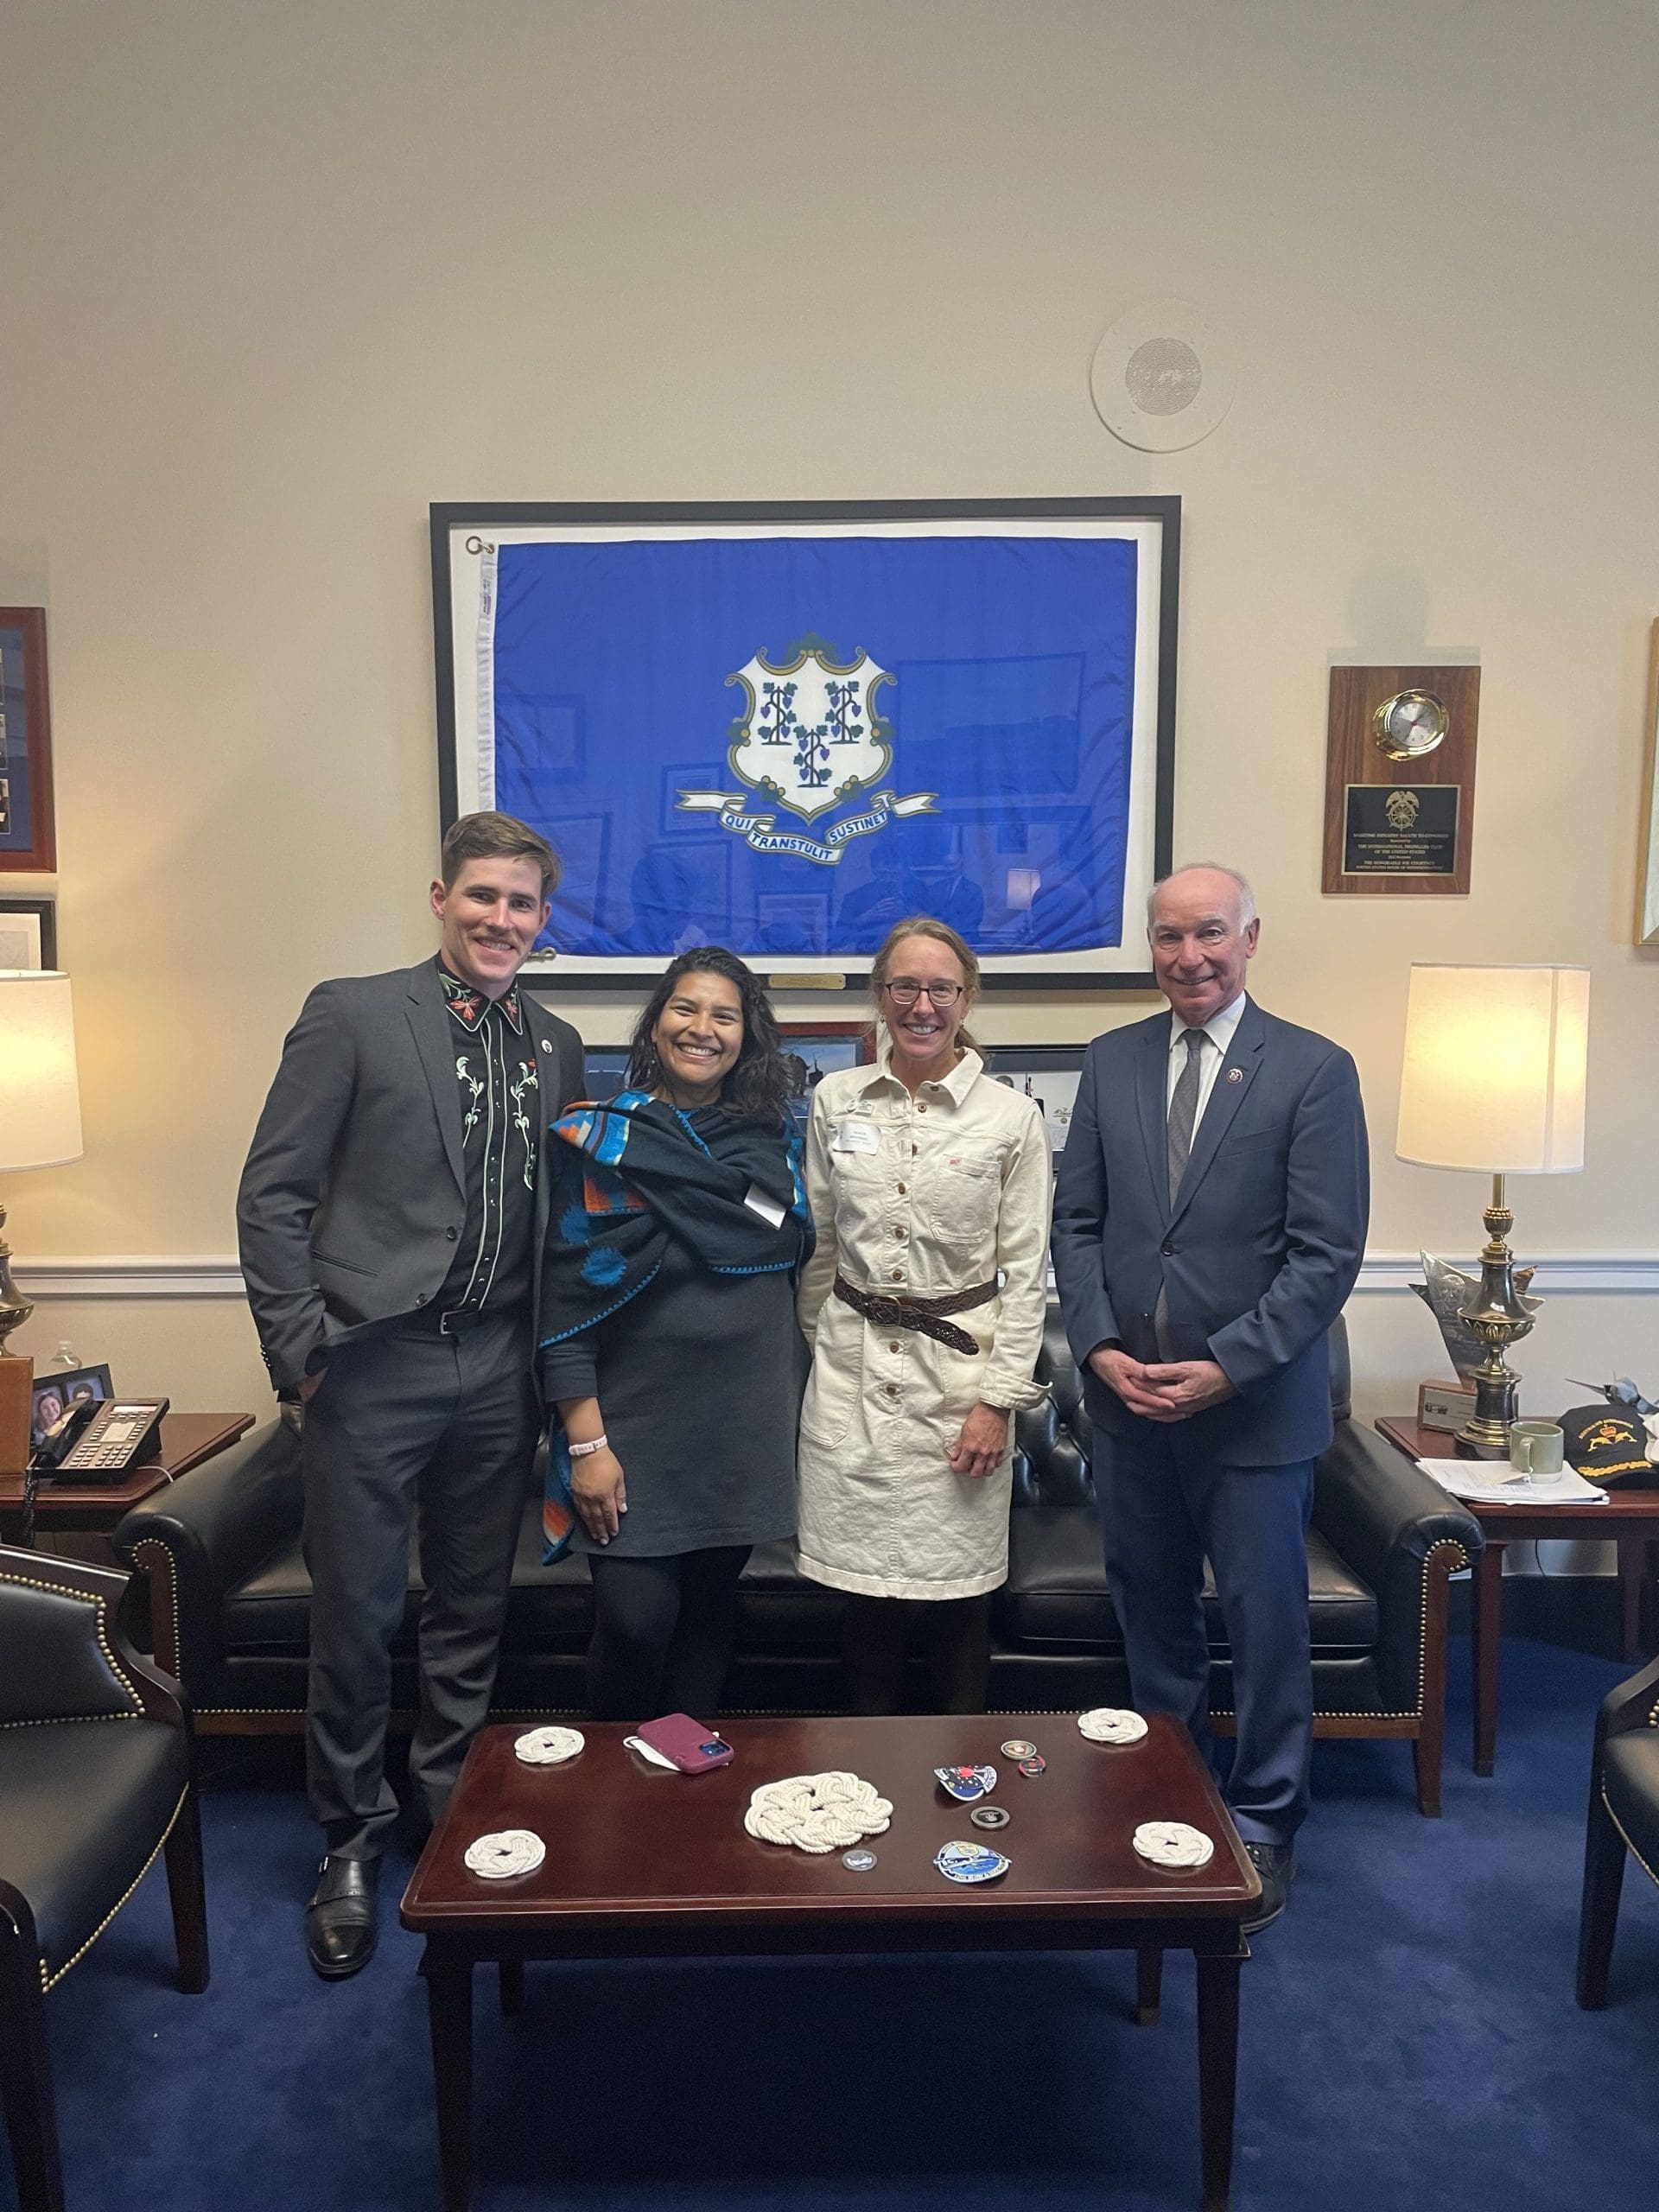 Will O'Meara stands next to Elizabeth Guerra of Seamarron Farmstead, Susan Mitchell of Cloverleigh Farm, and Representative Courtney in Representative Courtney's office in D.C.